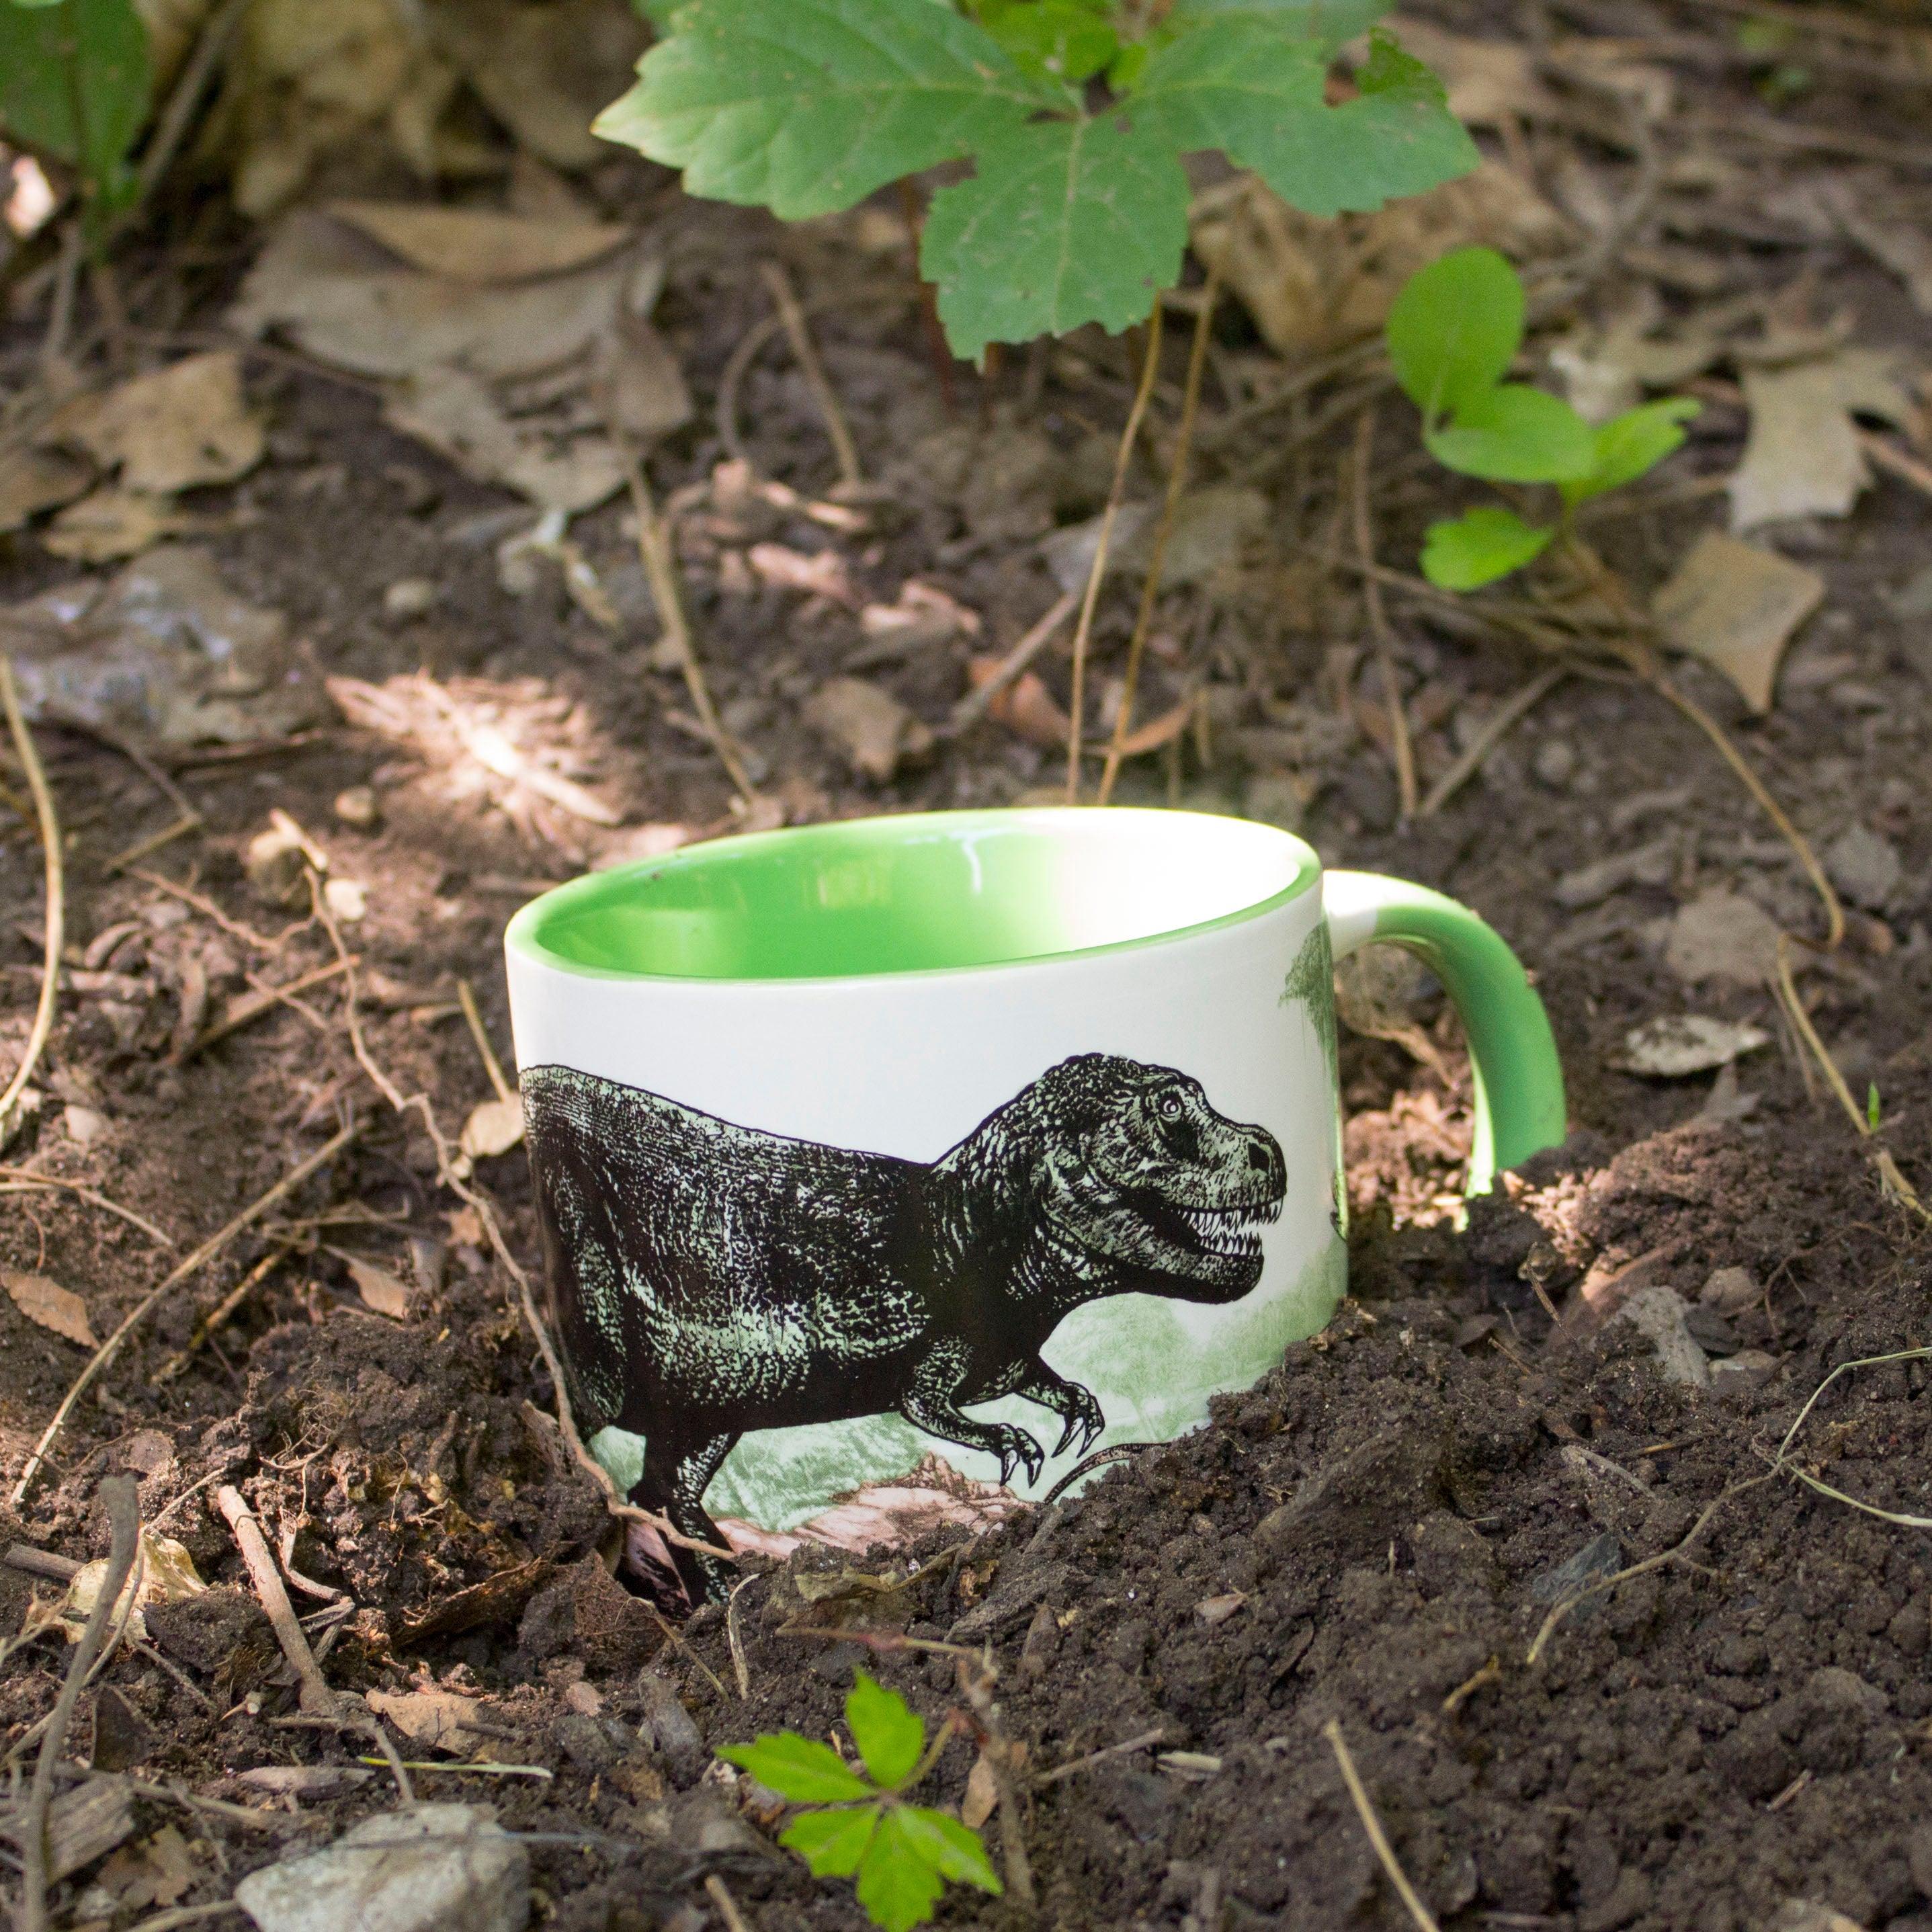 Product photo of Dinosaur Heat-Changing Mug, a novelty gift manufactured by The Unemployed Philosophers Guild.